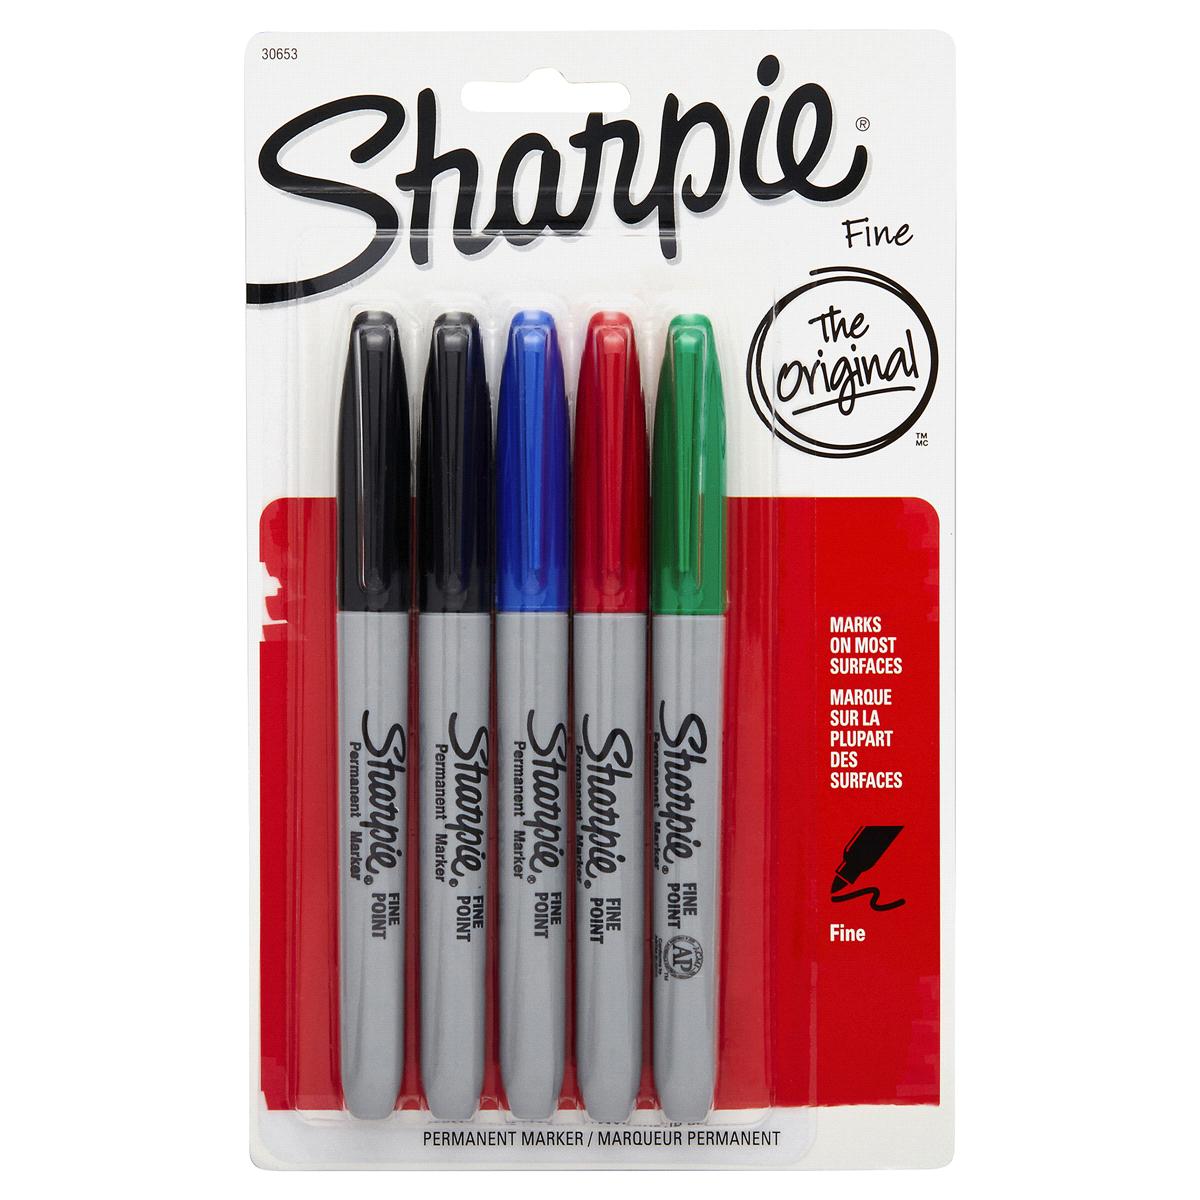 Sharpie Permanent Markers Assorted Colors for $2.97 Shipped